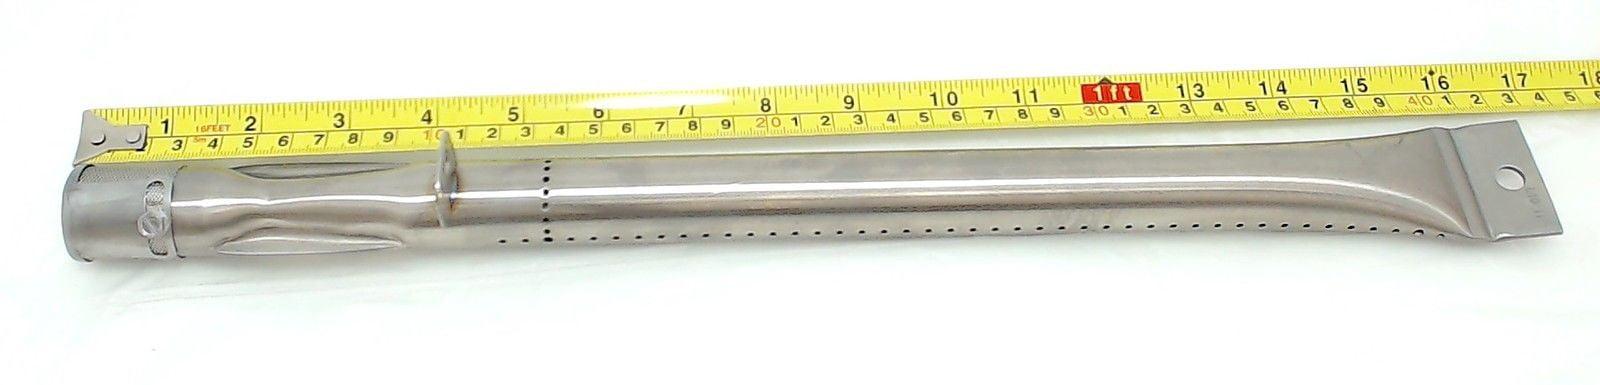 Pipe Tube Burners for Perfect Flame BBQ Grillware Stainless Steel 16 1/2" x 1" 